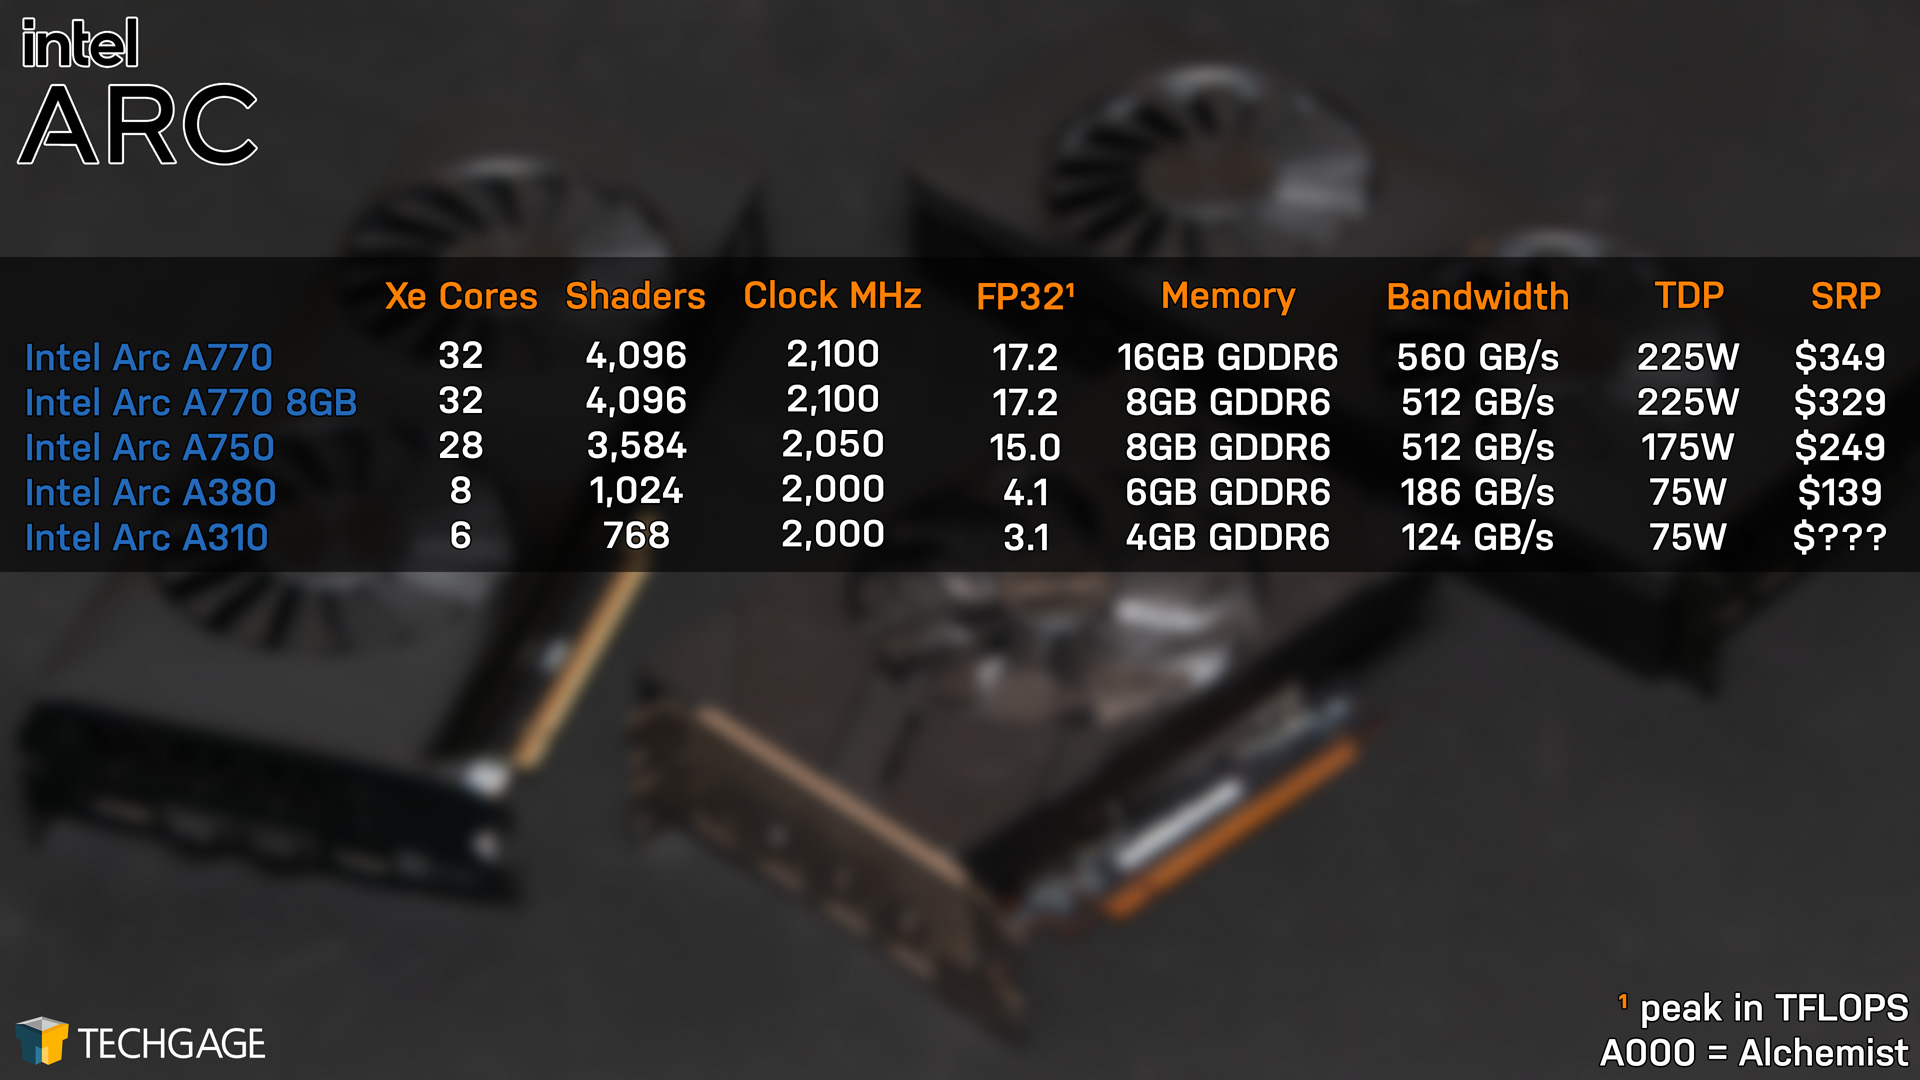 Intel Arc Lineup (as of A770 Launch)